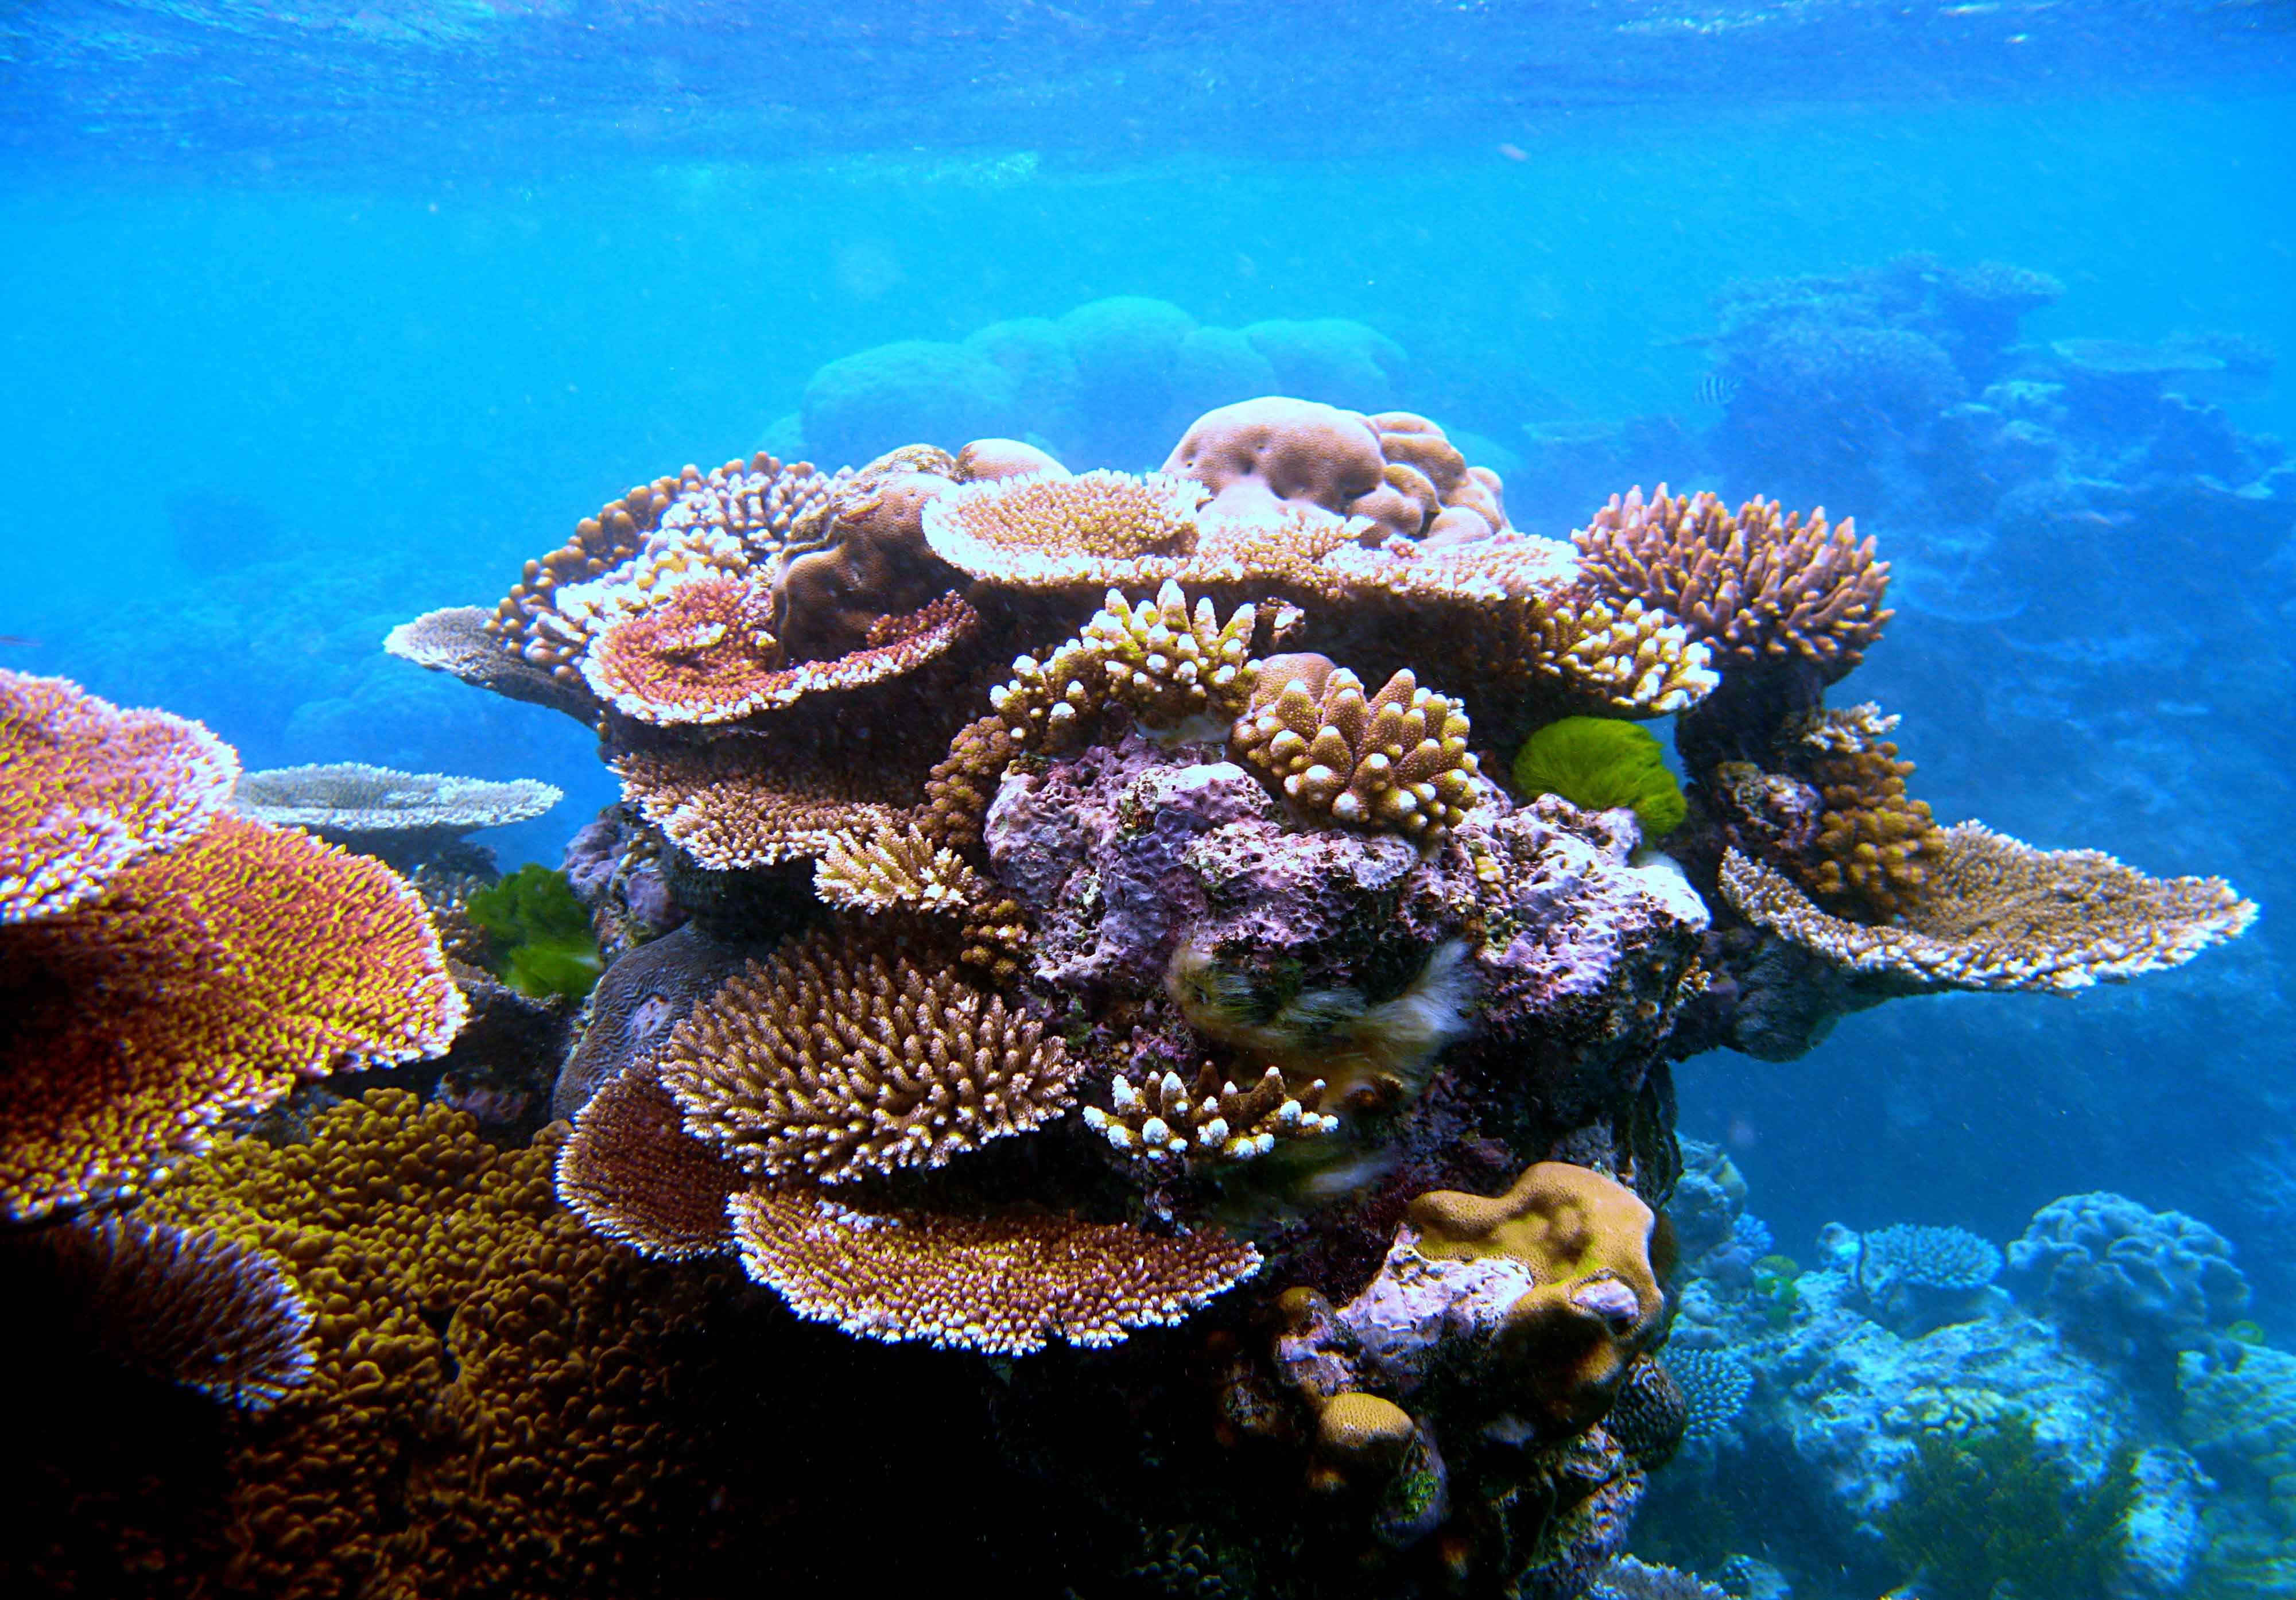 Awesome Coral Reef Photo. Coral Reef Wallpaper